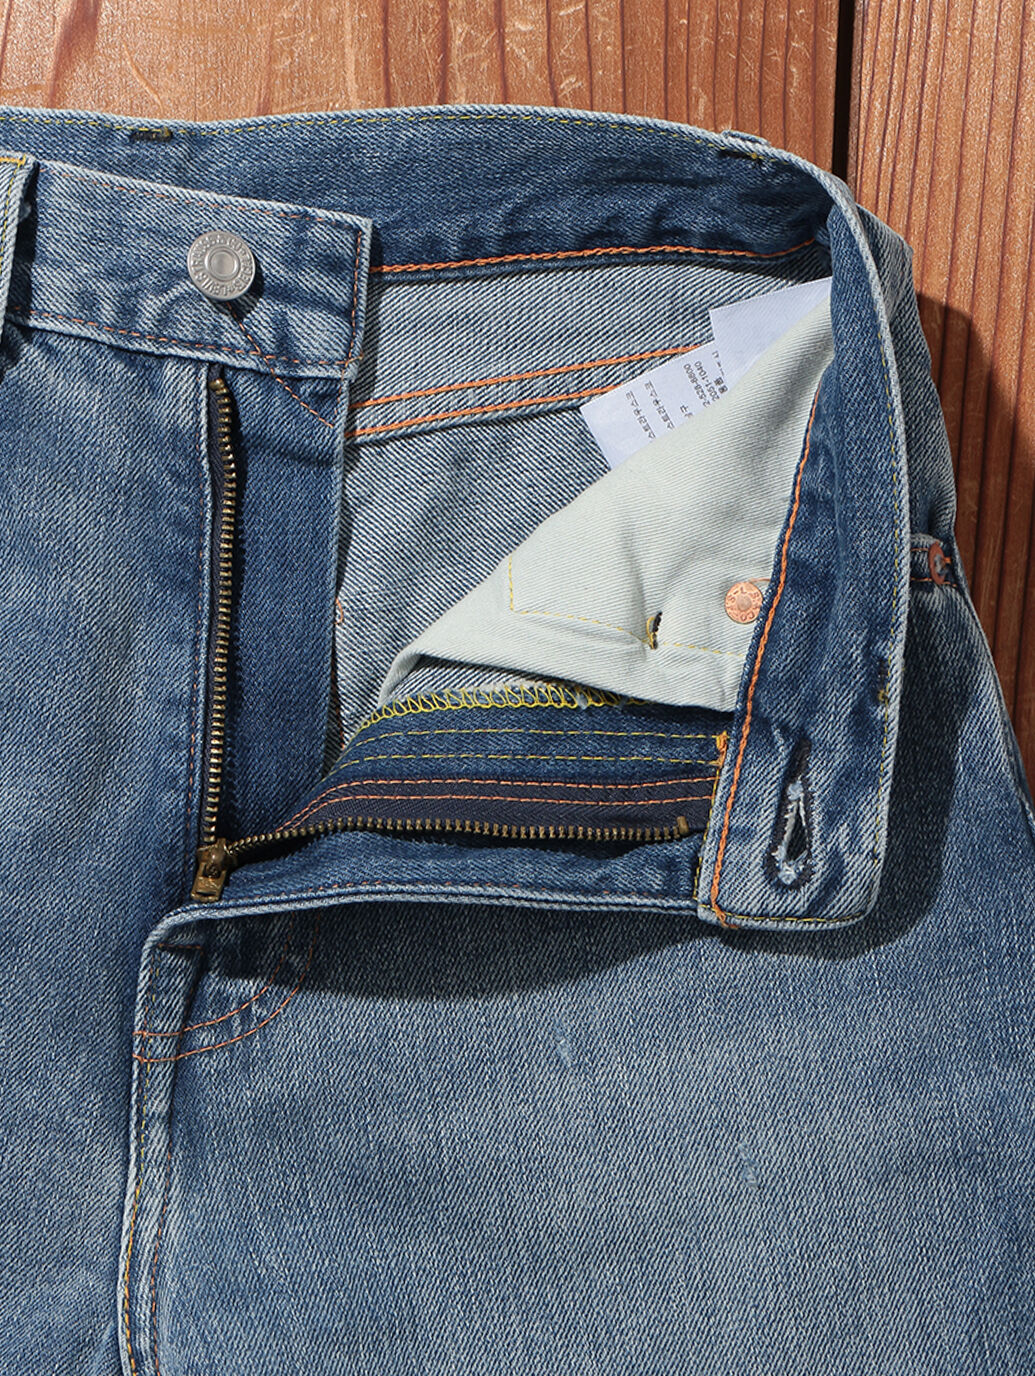 LEVI'S® VINTAGE CLOTHING1950モデル 701 JEANS JAGGED ORB